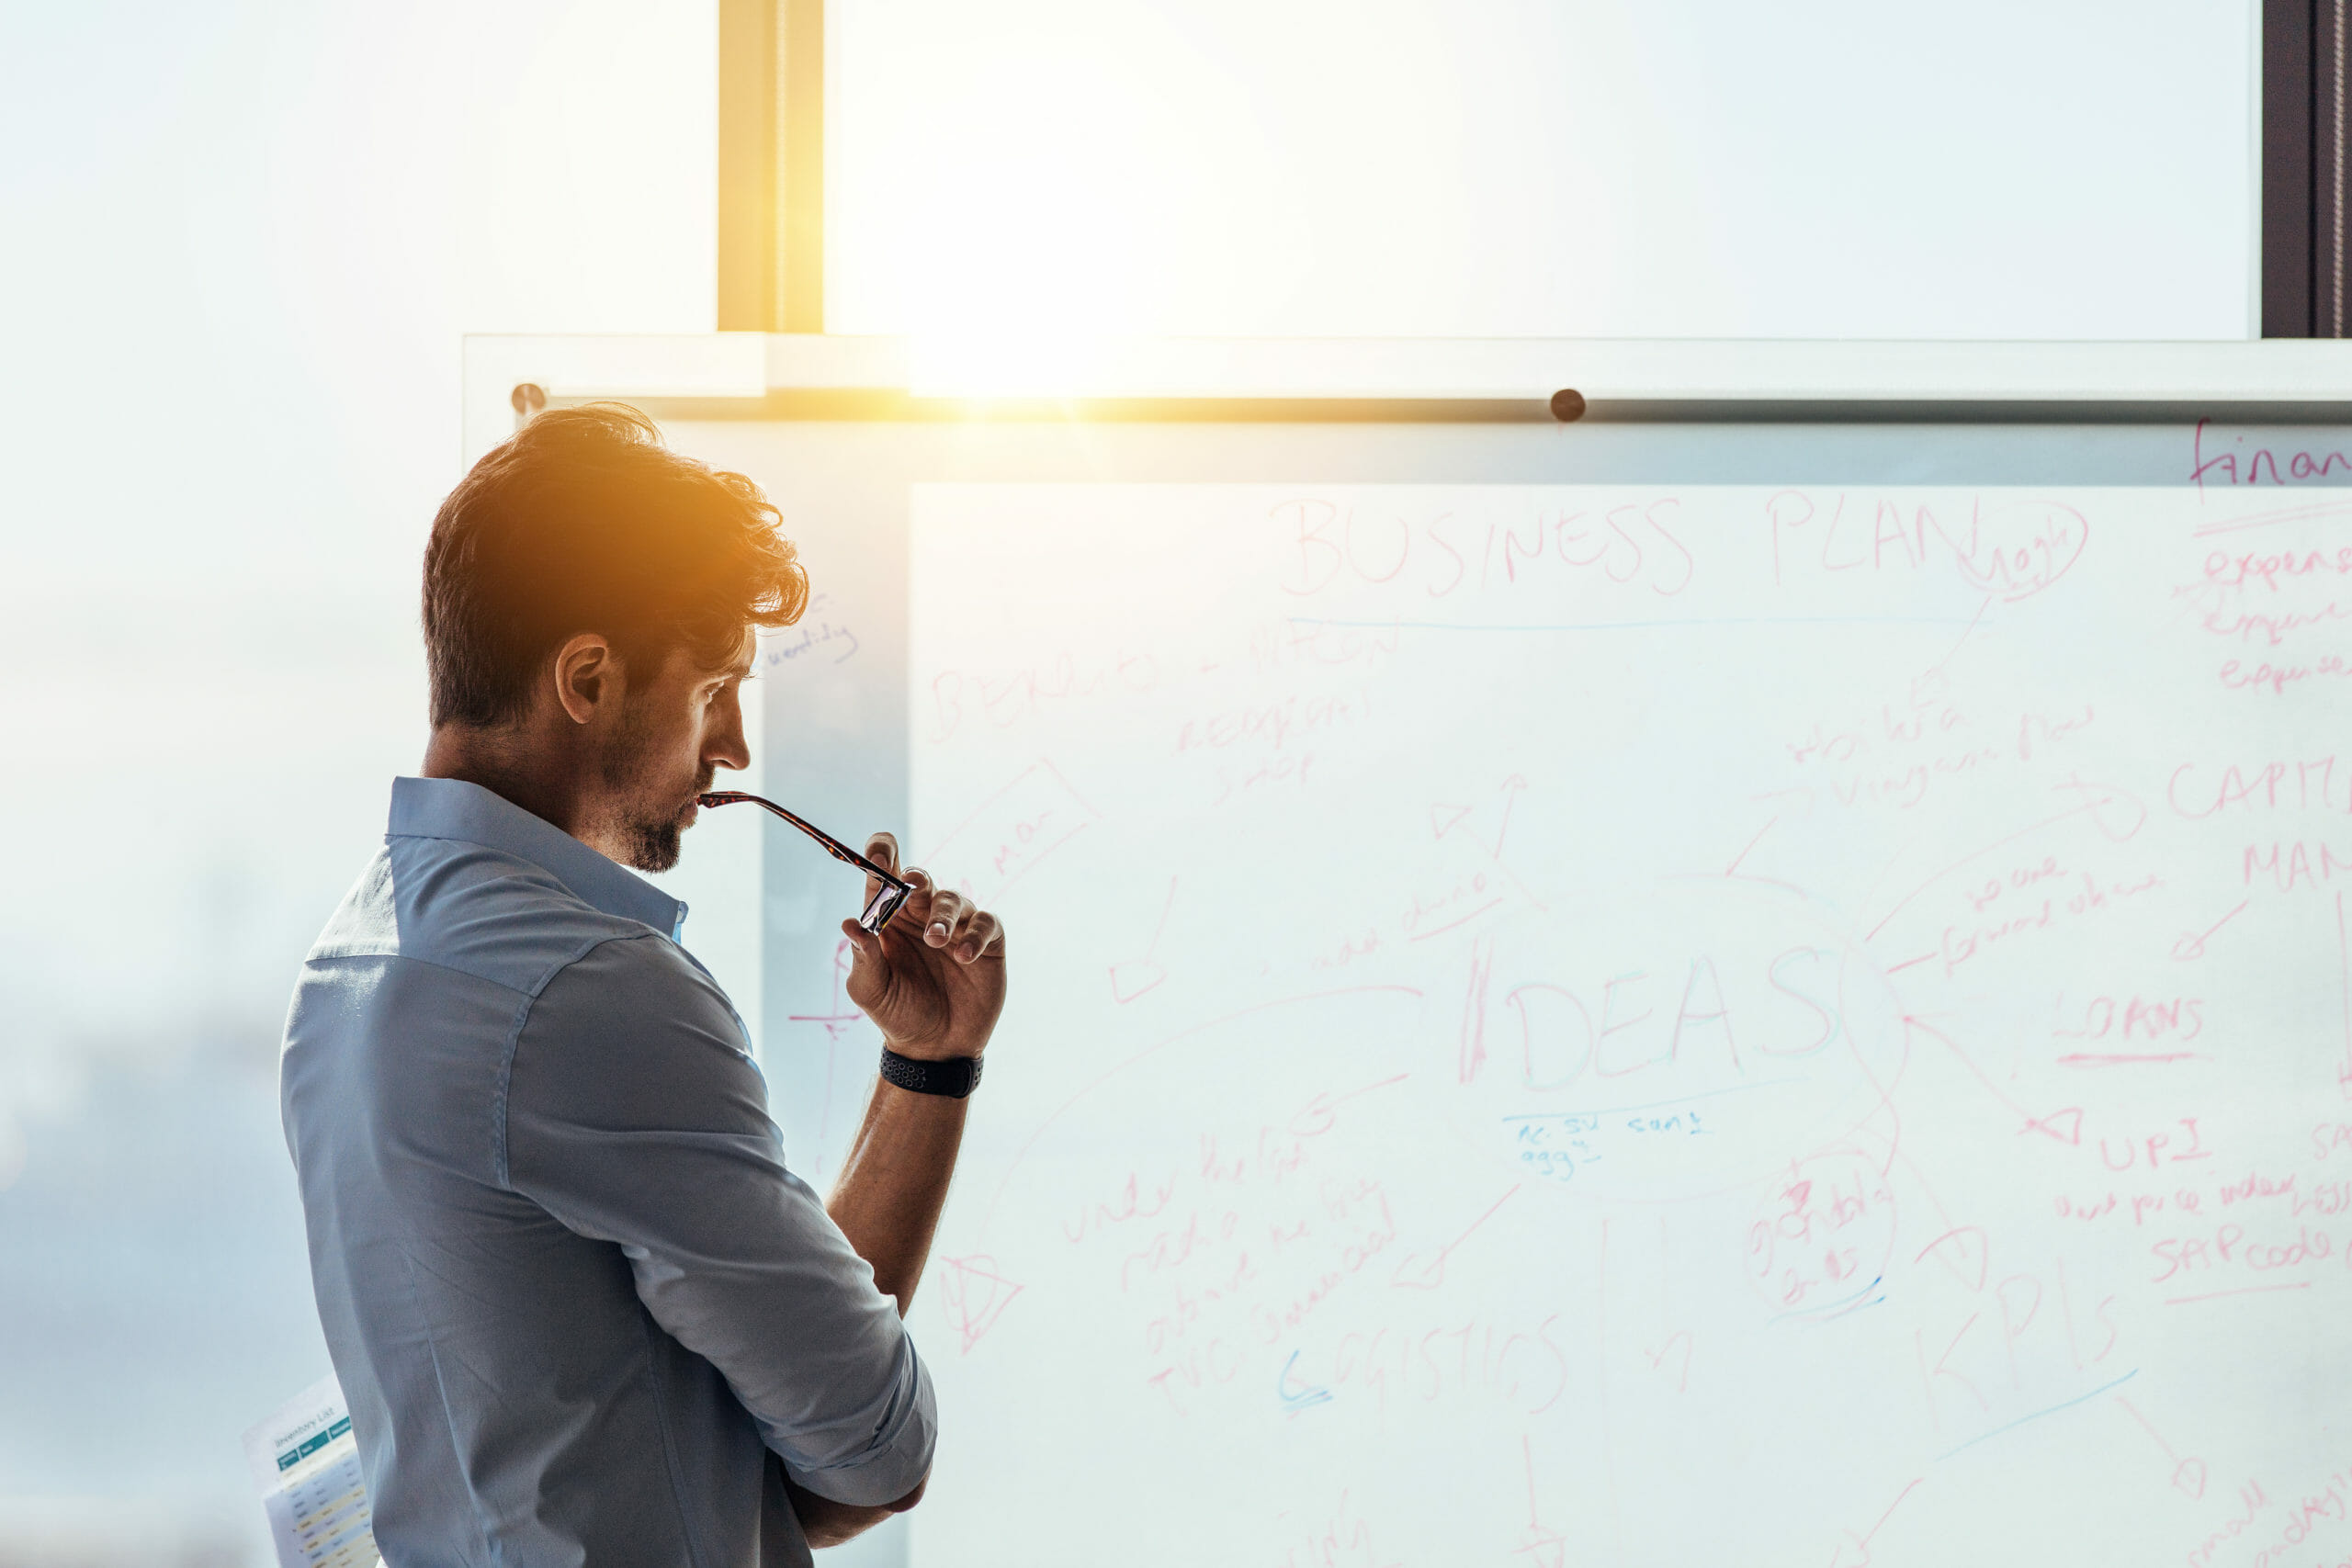 Man thinking while looking at a whiteboard shutterstock image